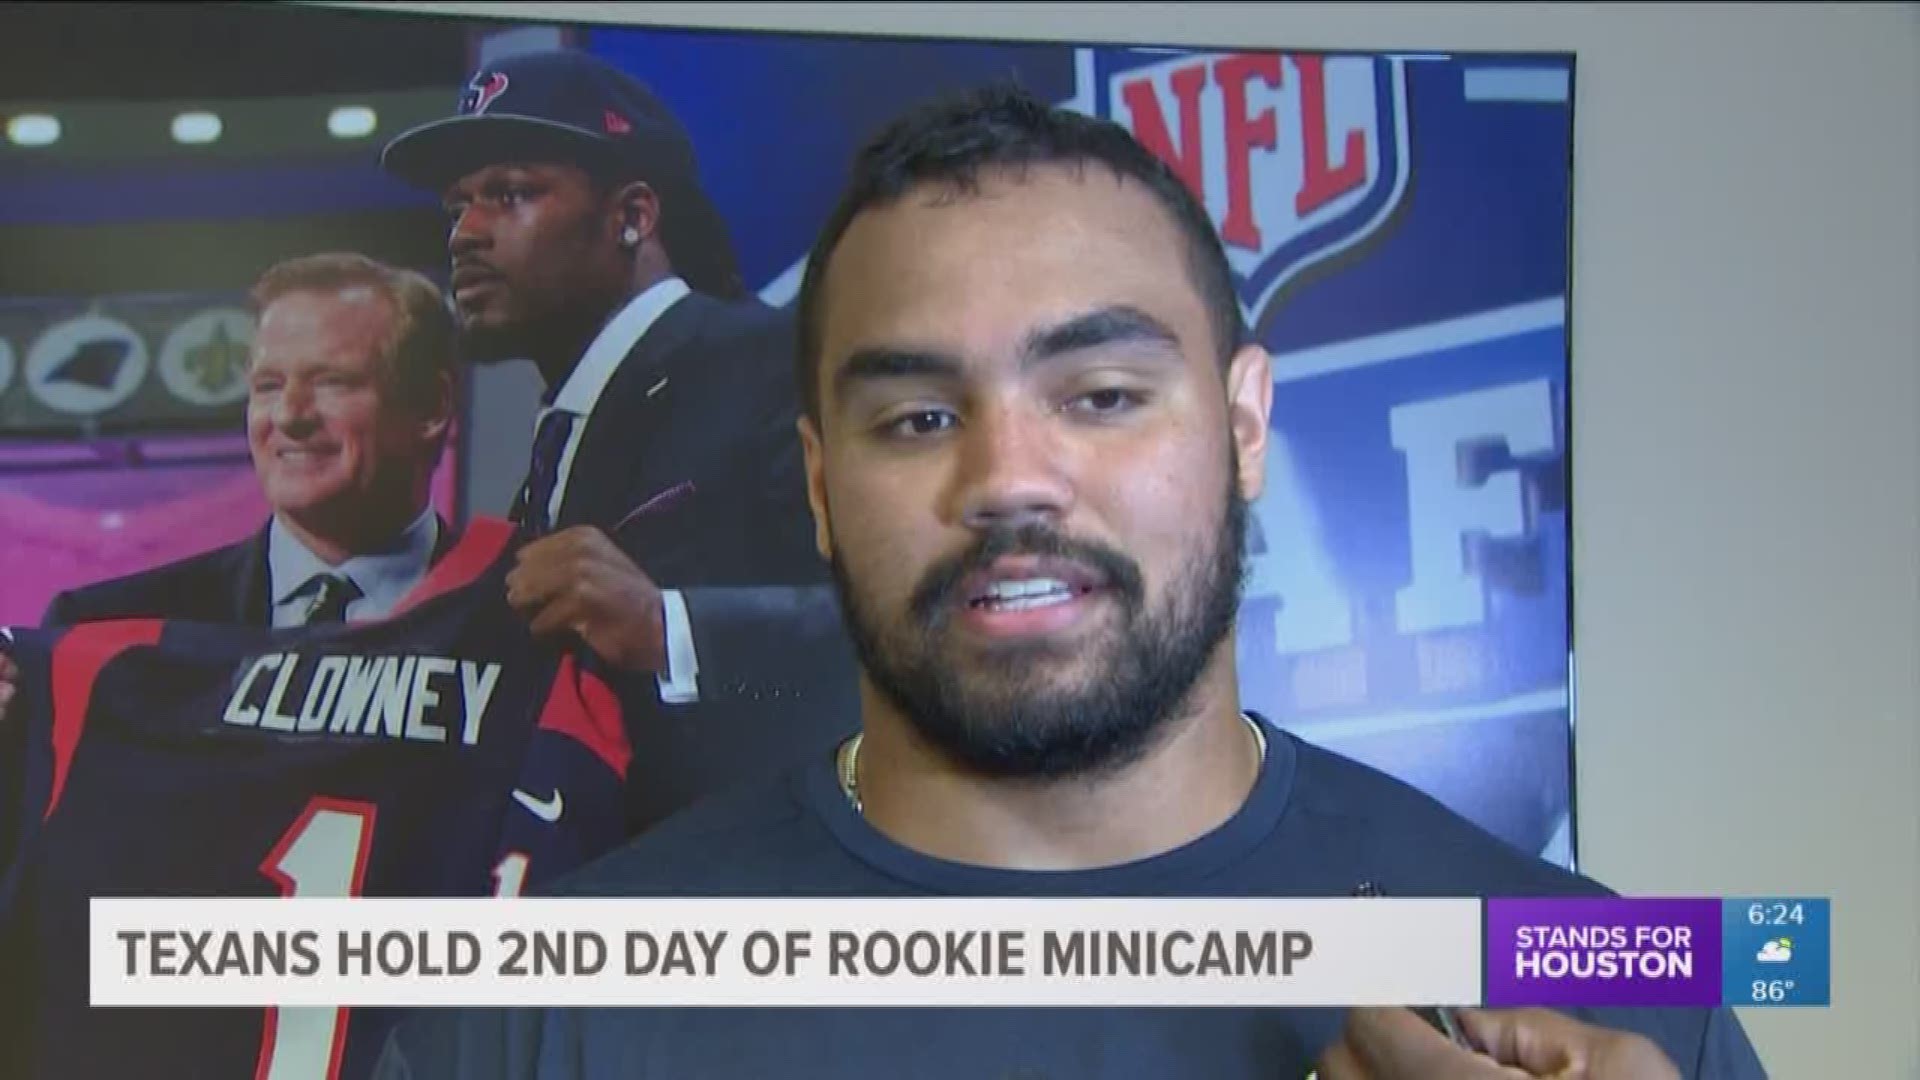 The Houston Texans held the second day of rookie minicamp Saturday.